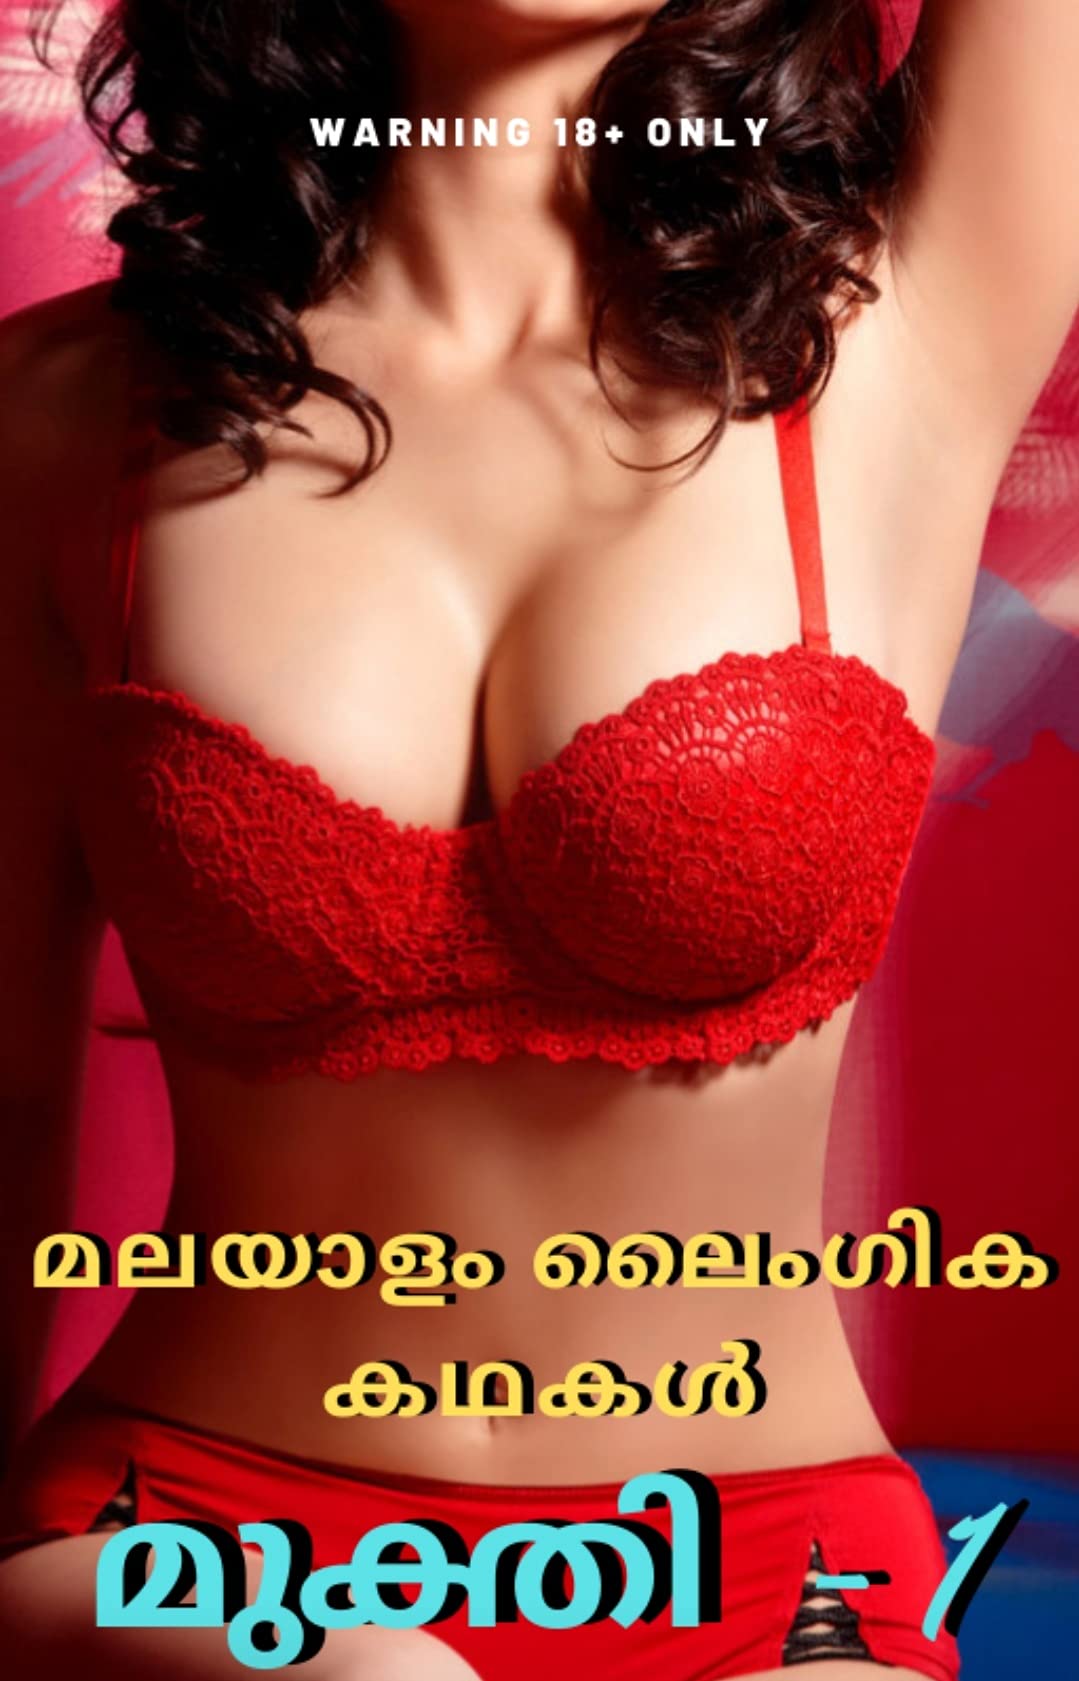 ashraf shaheen recommends darling tamil movie online pic